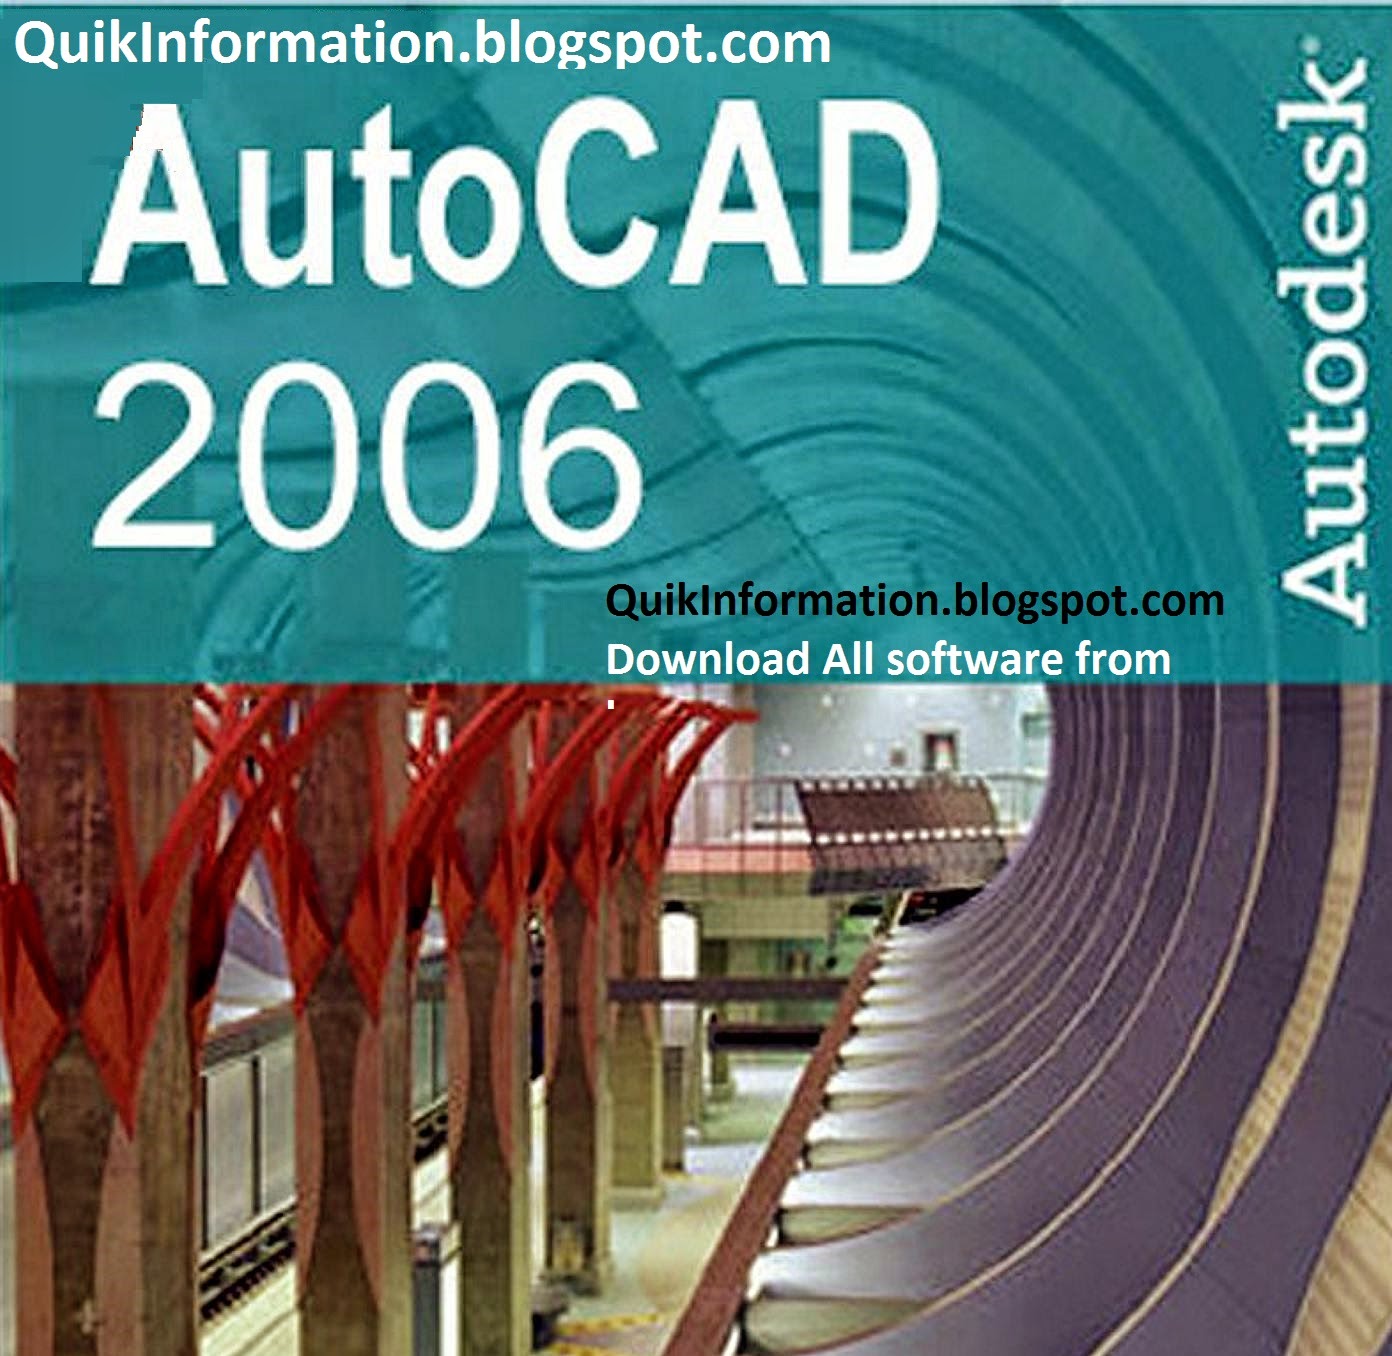 solidworks 2006 free download